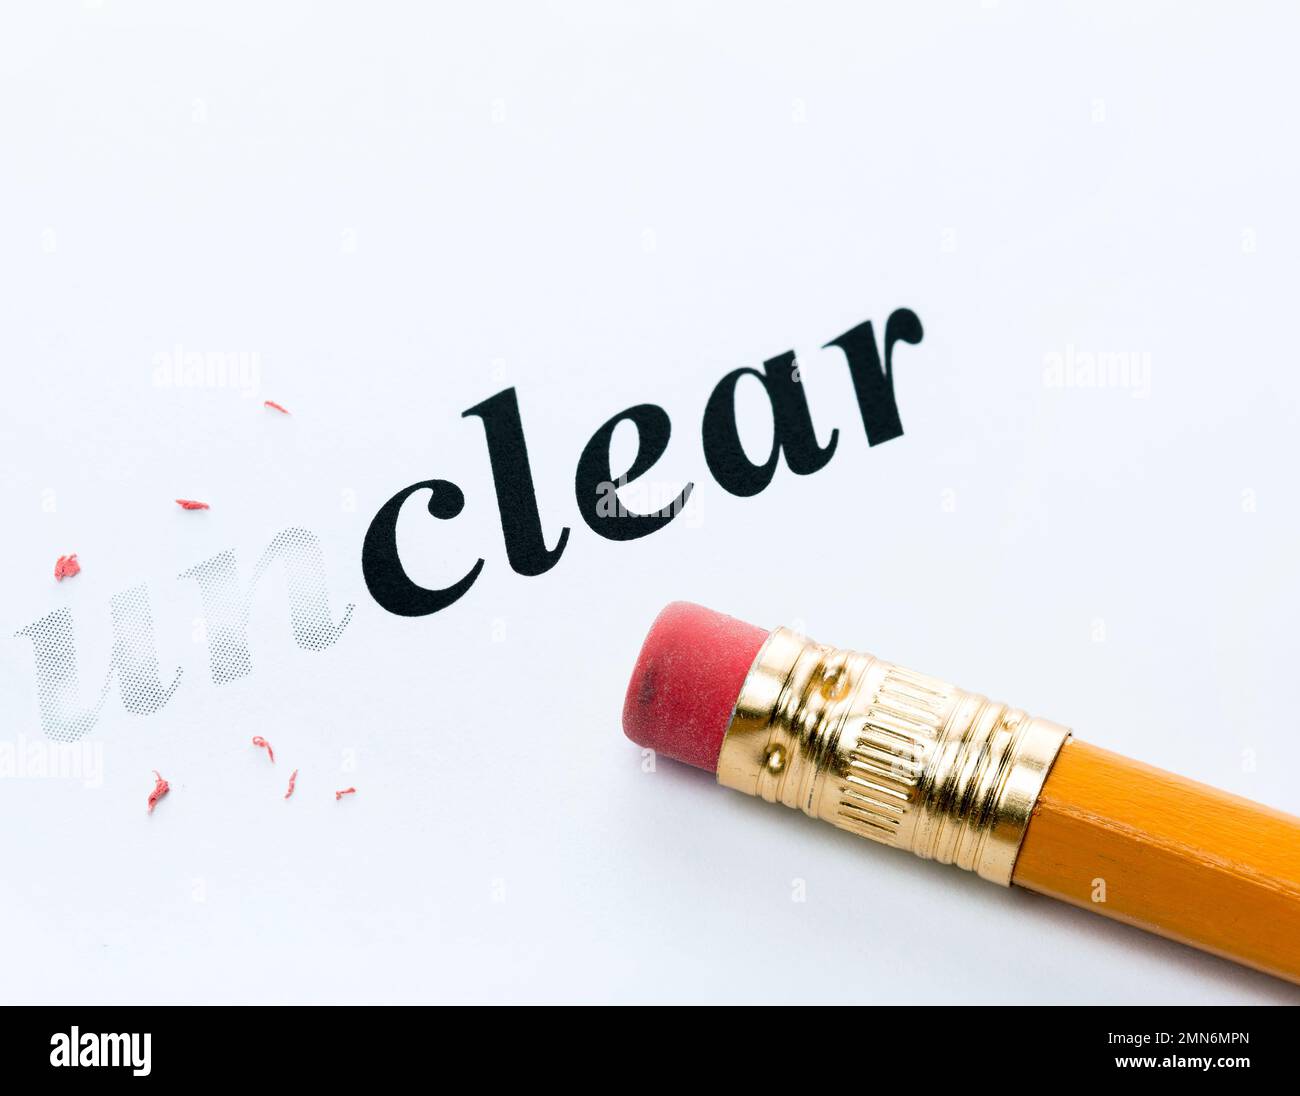 Word and pencil with eraser close-up Increased focus area Stock Photo